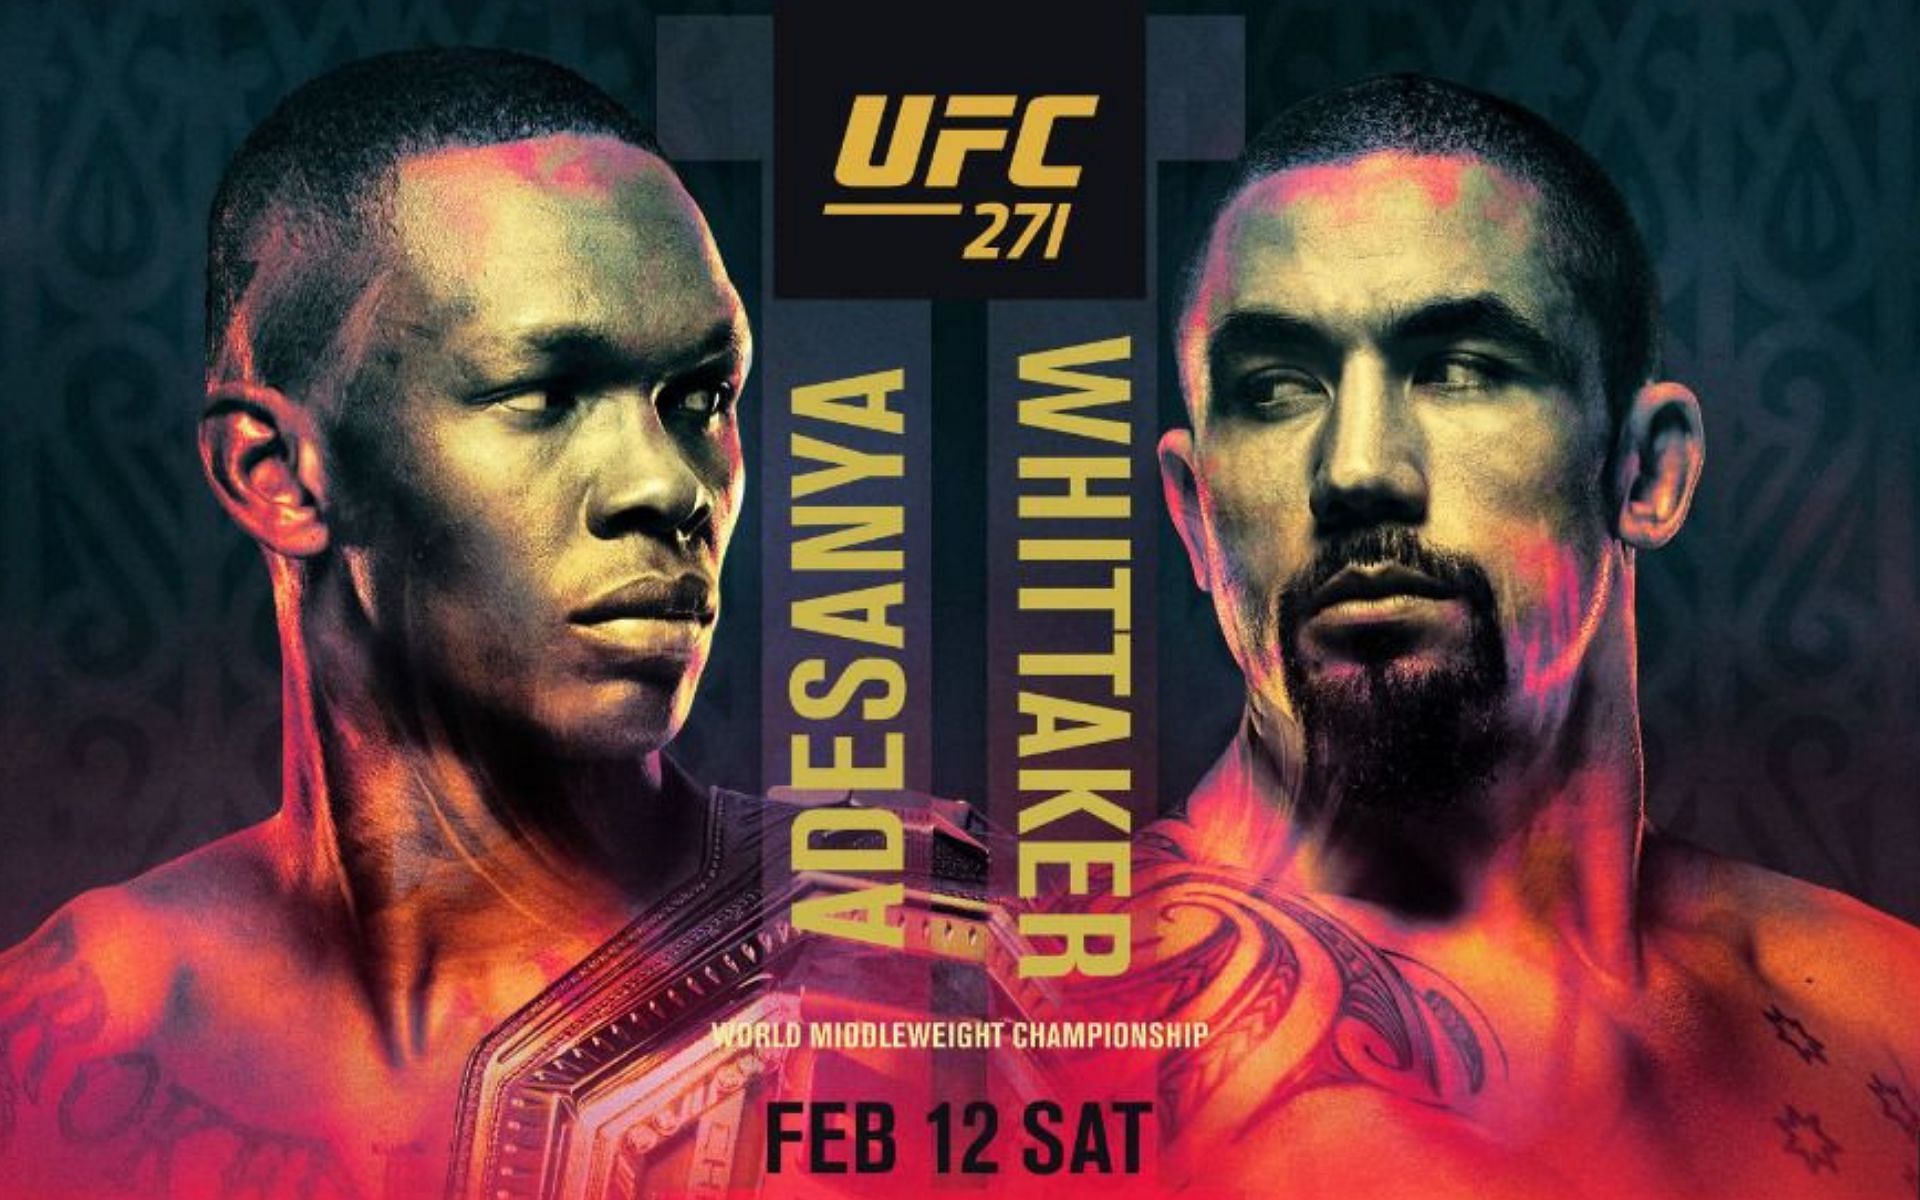 UFC 271 crackstream, reddit stream and buffstream alternatives How you can legally watch the event